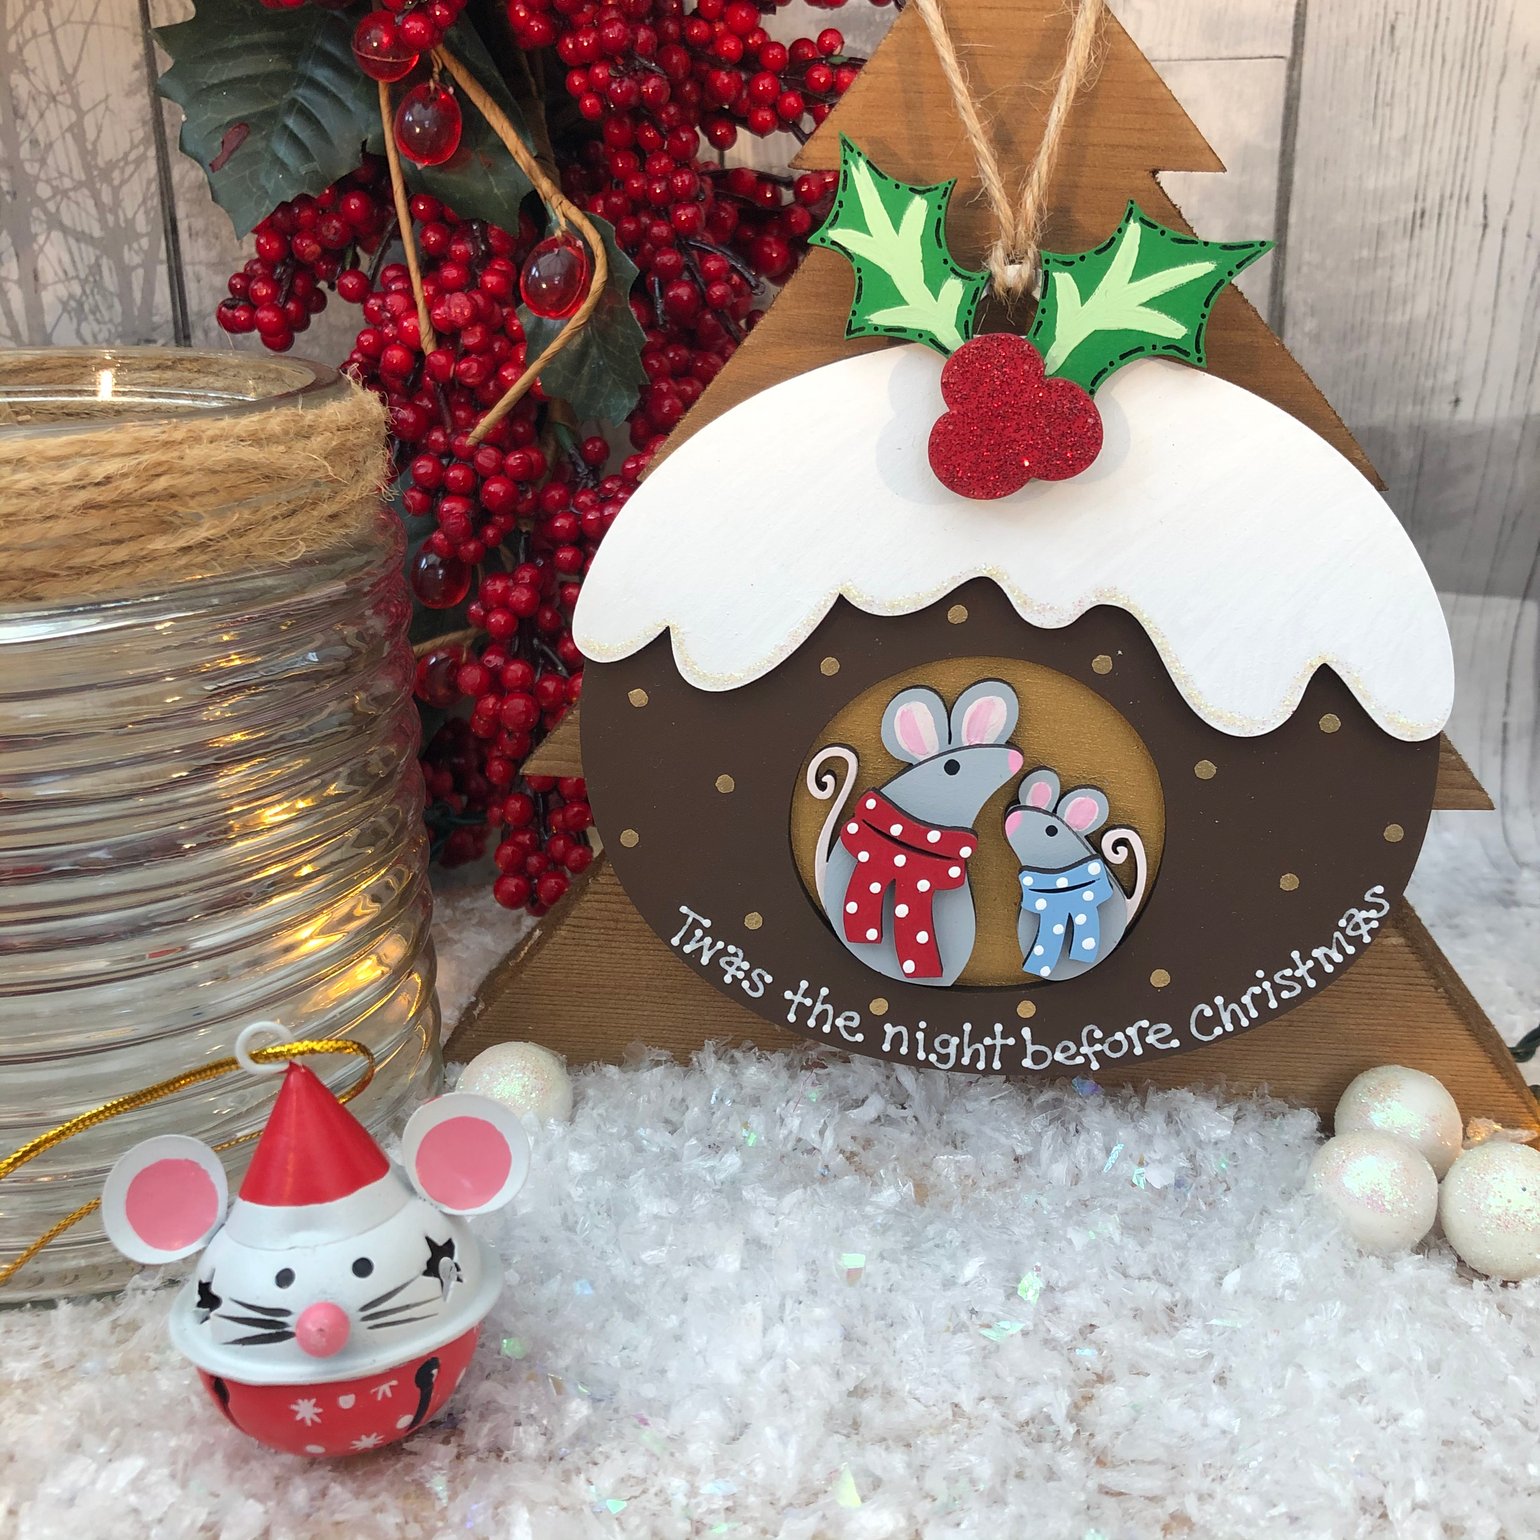 Image of Christmas Pudding with cute mice